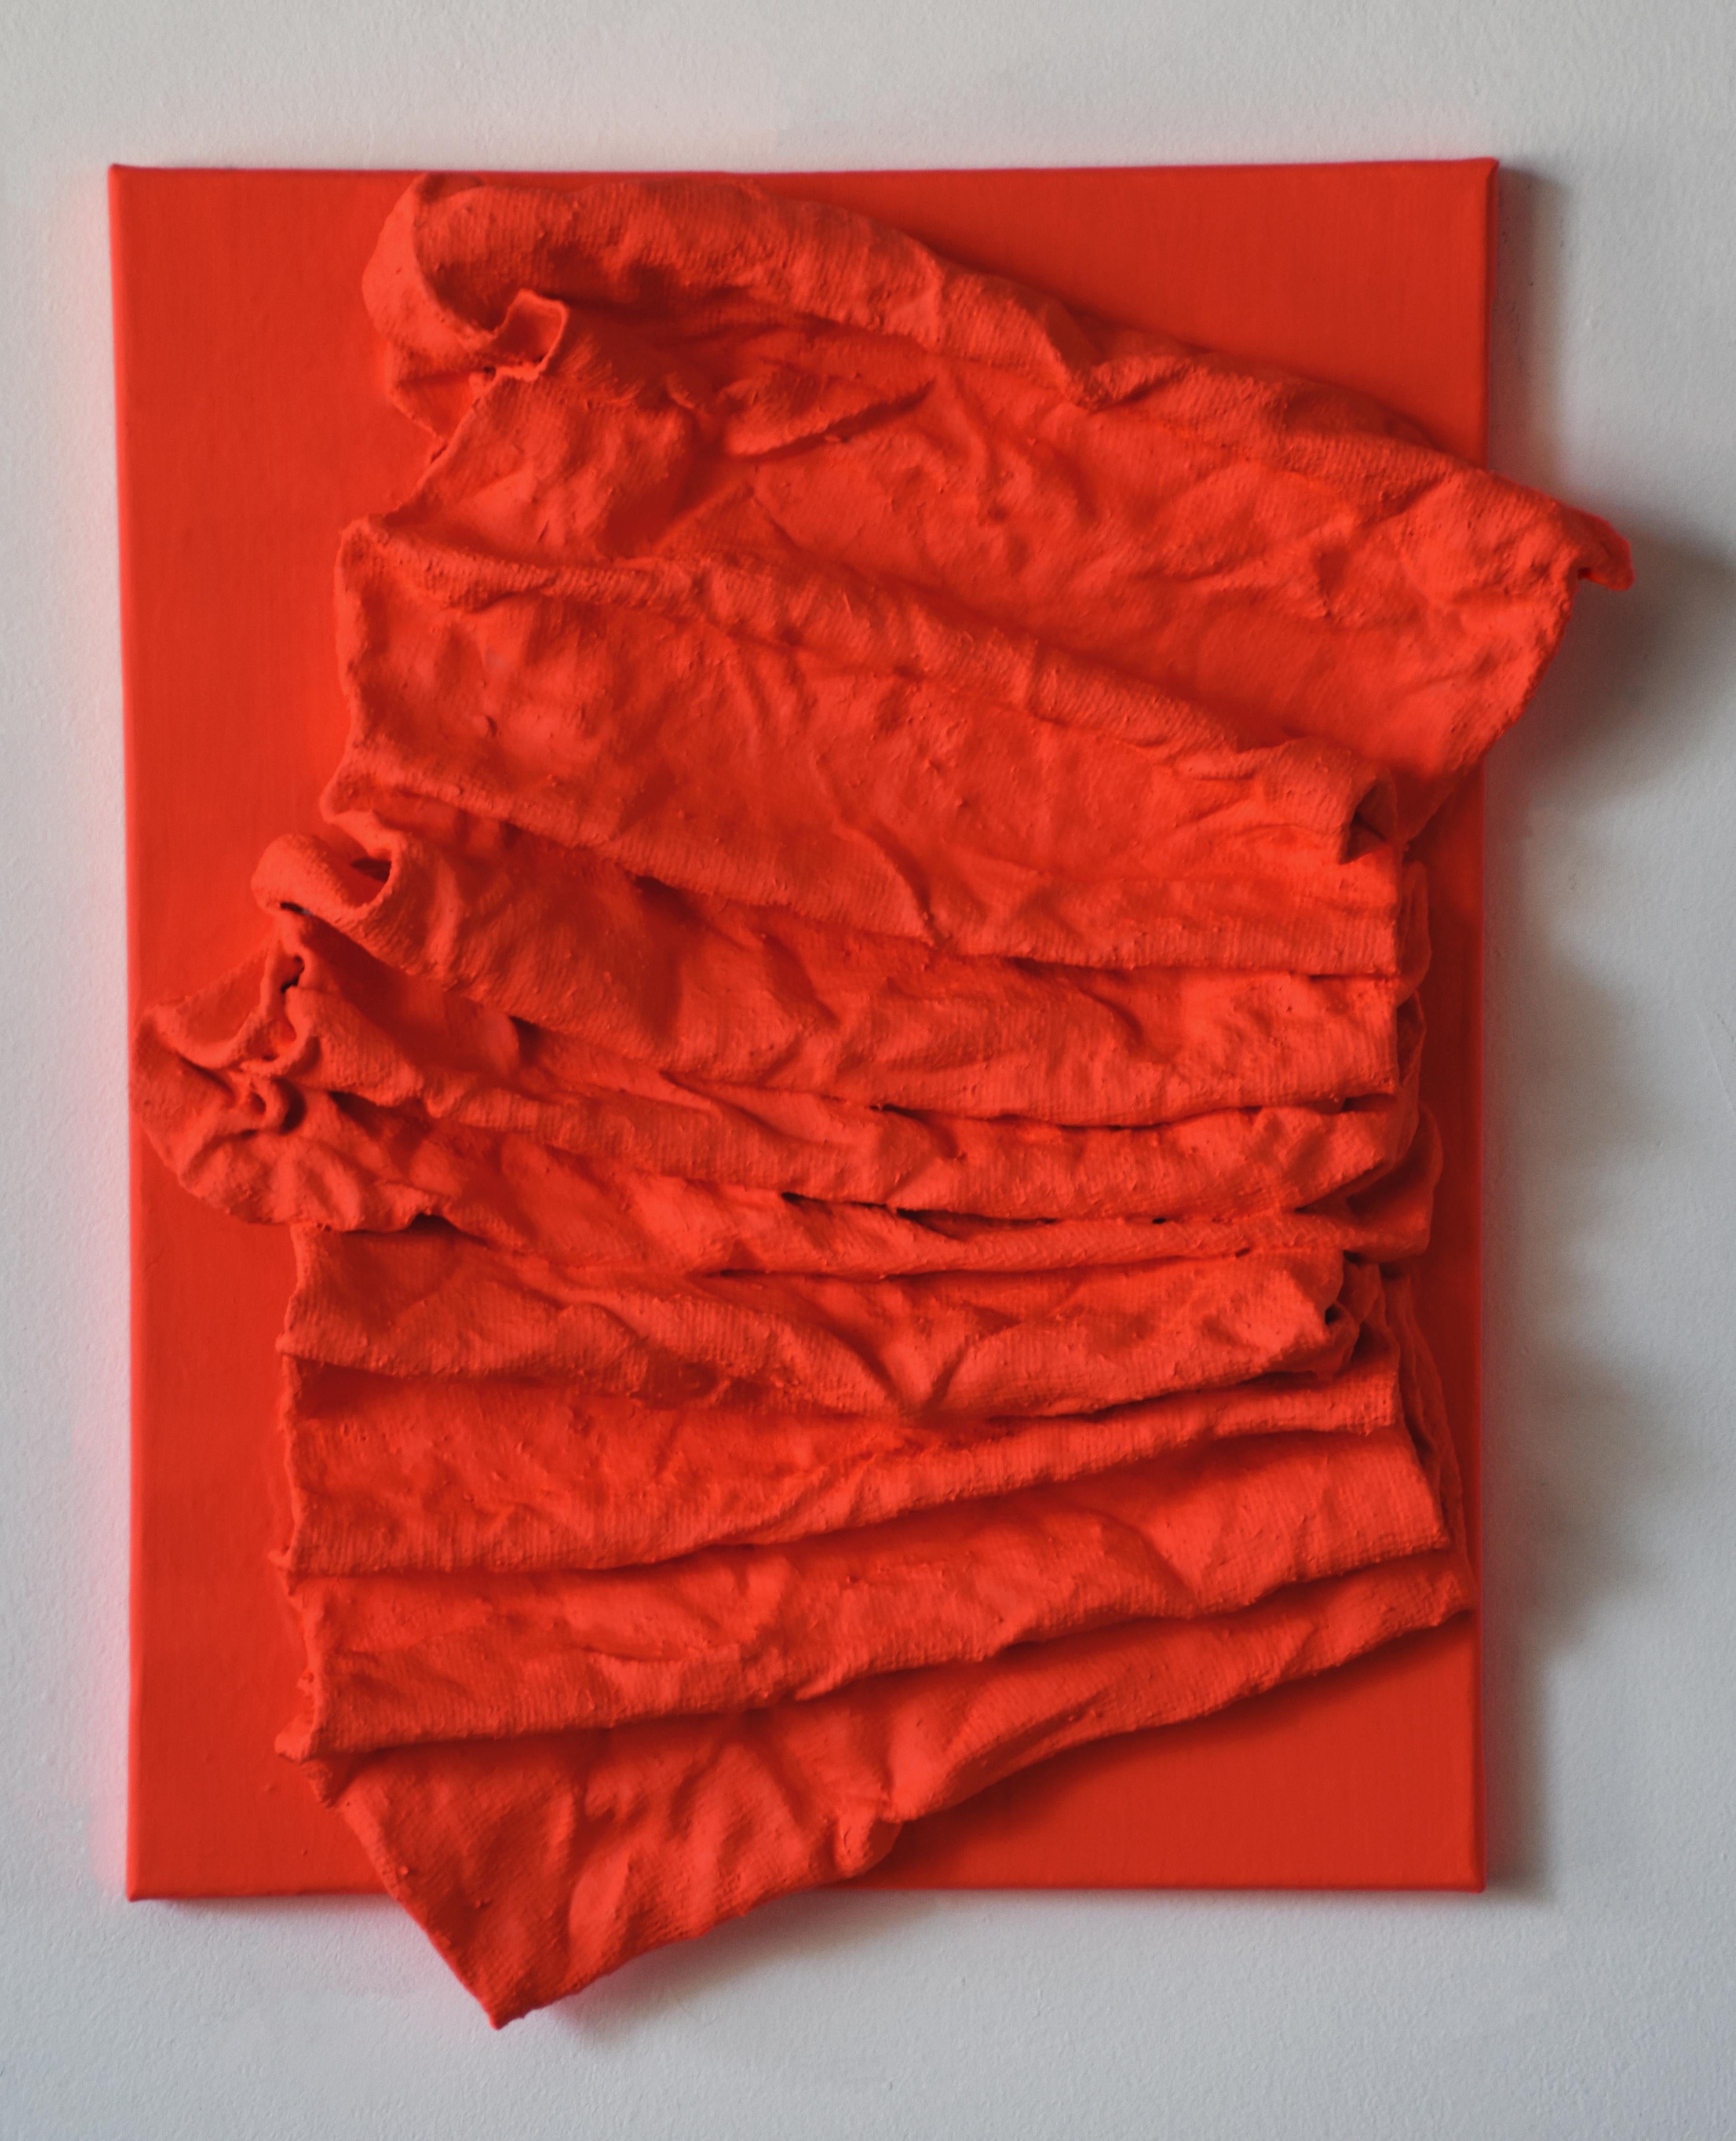 Fluorescent Red Folds (hardened fabric, wall red art, contemporary art design) - Mixed Media Art by Chloe Hedden